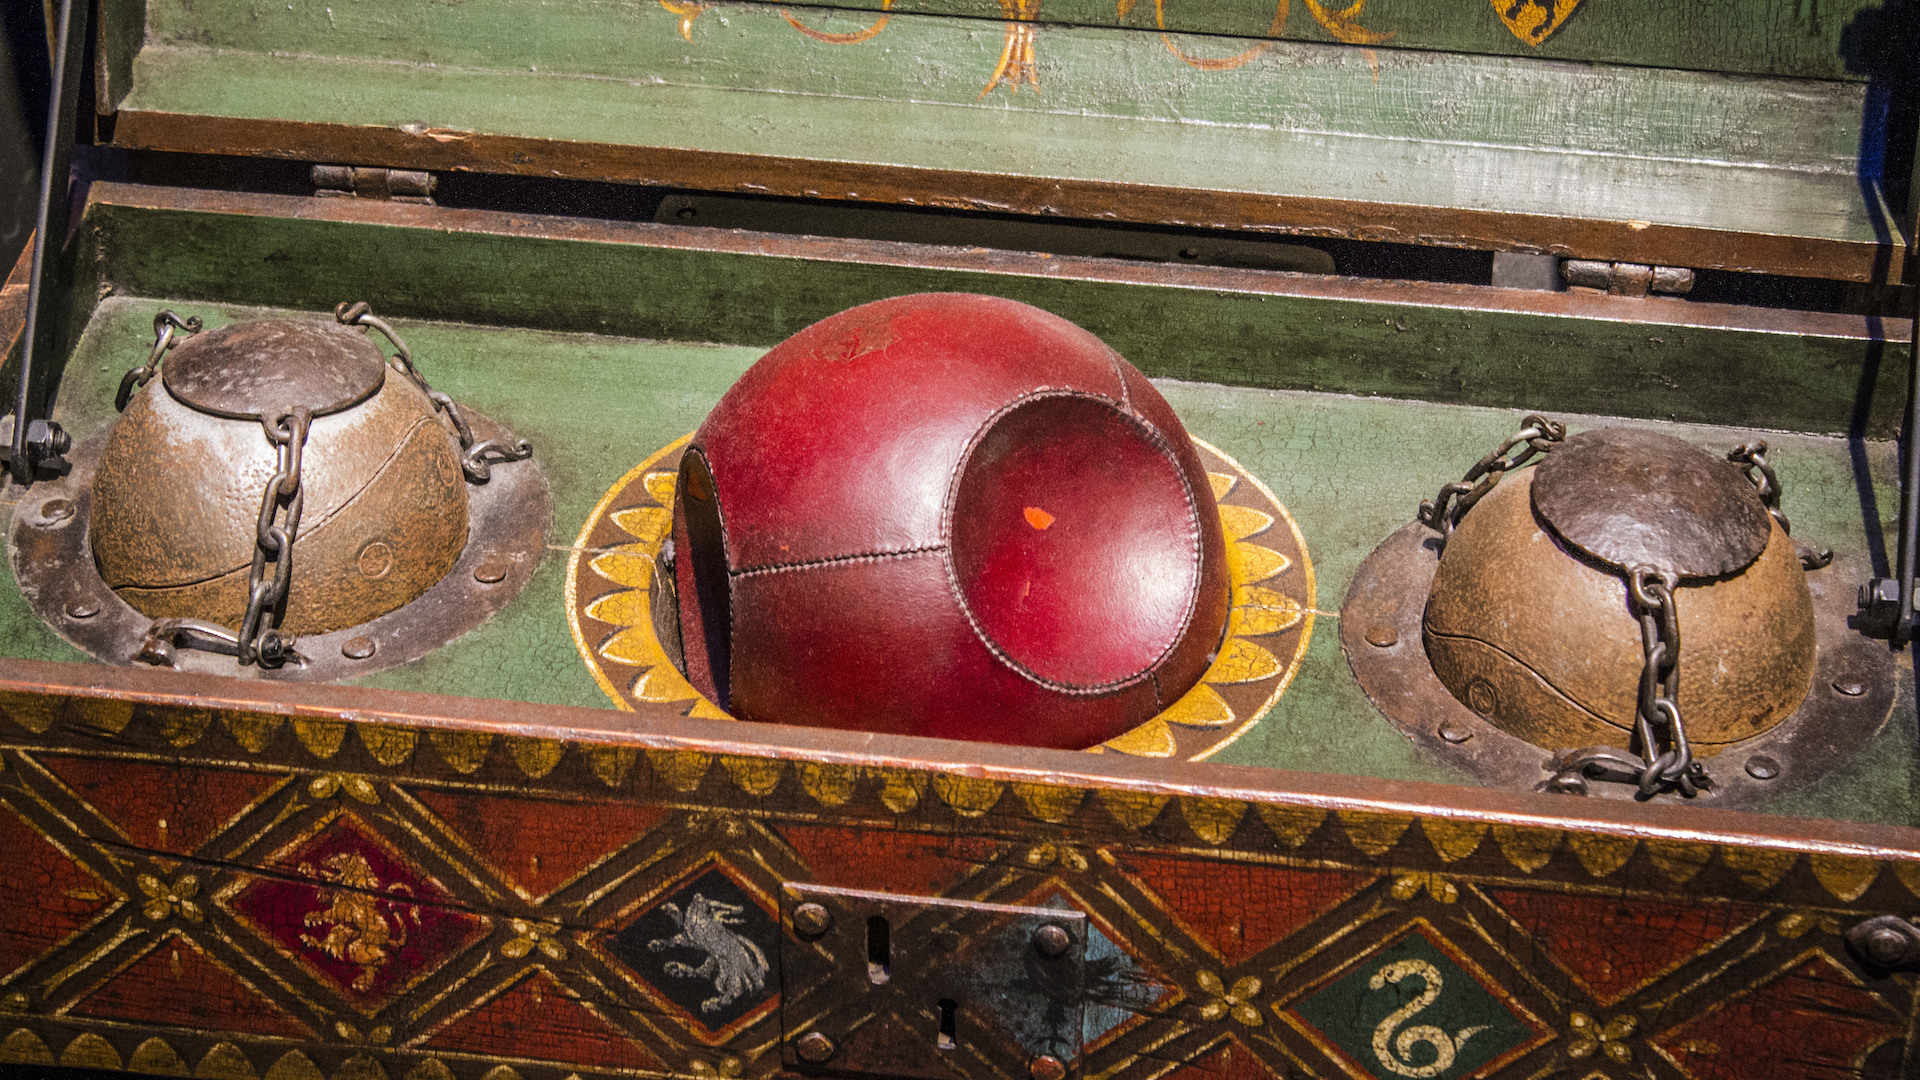 Quidditch balls at the Warner Brothers Studio tour, The Making of Harry Potter